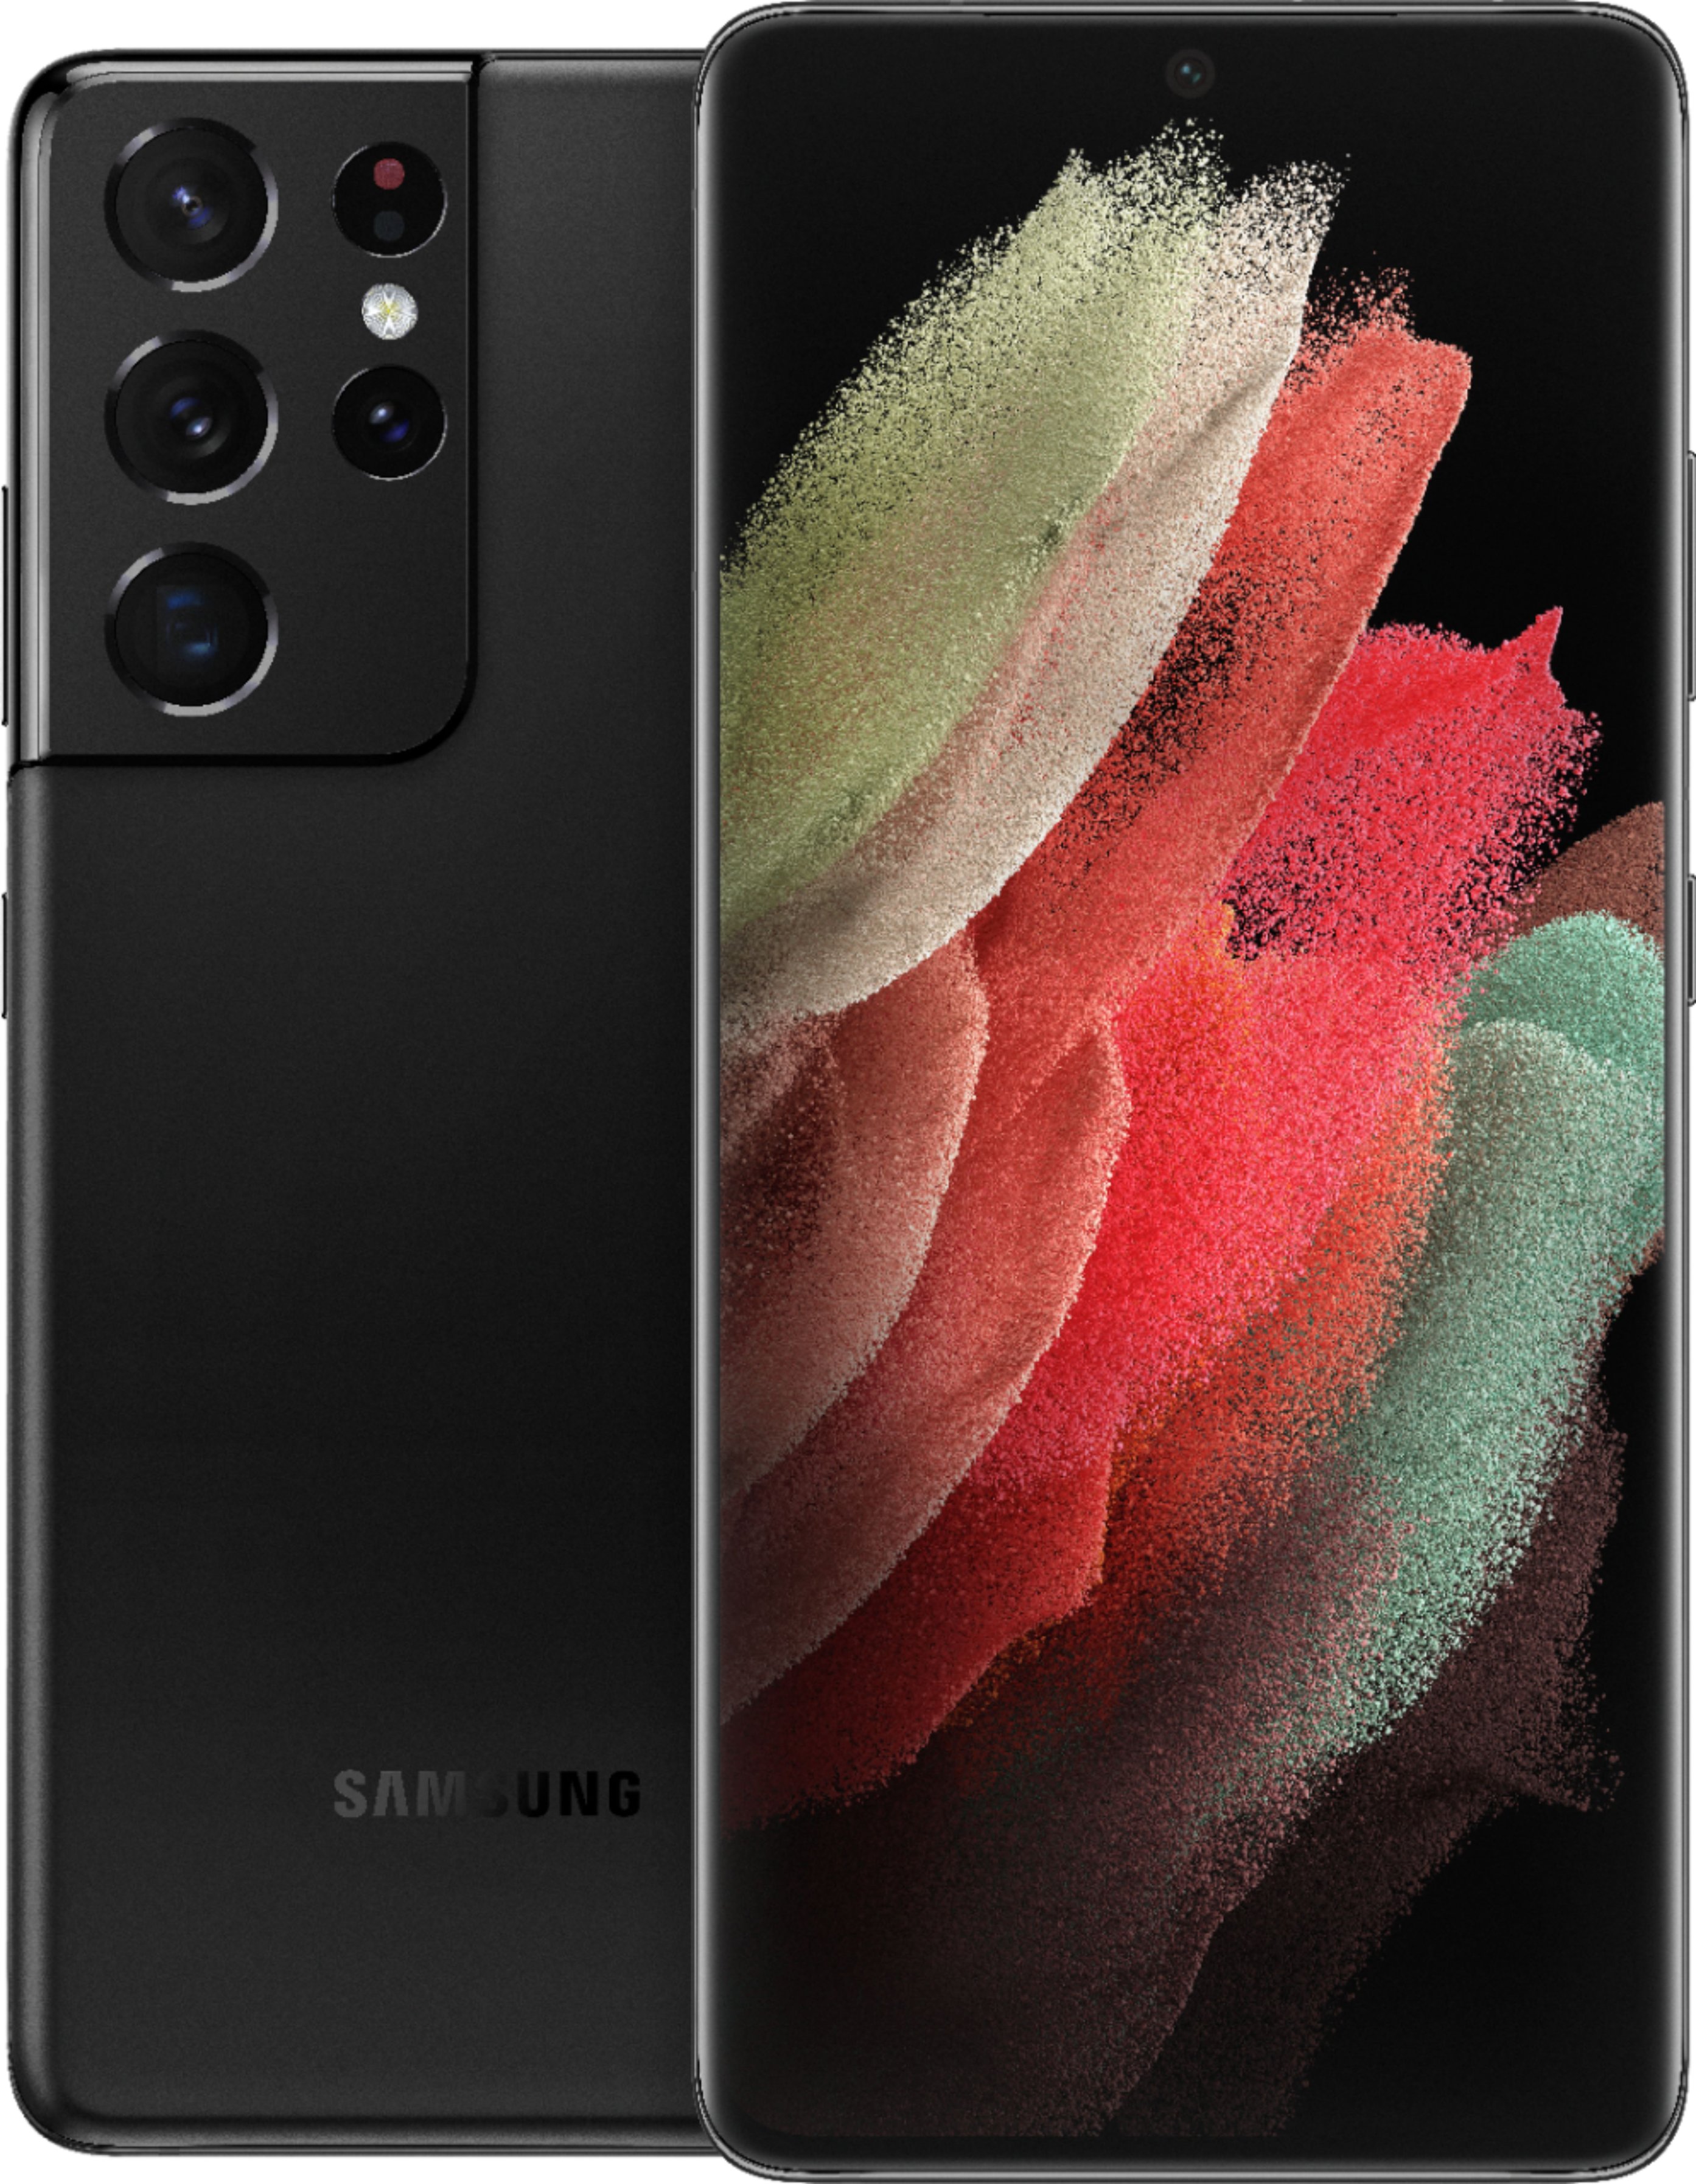 S21 ultra 5G Loyality Deal ATT 128GB $500 - 2 year contract Reqd